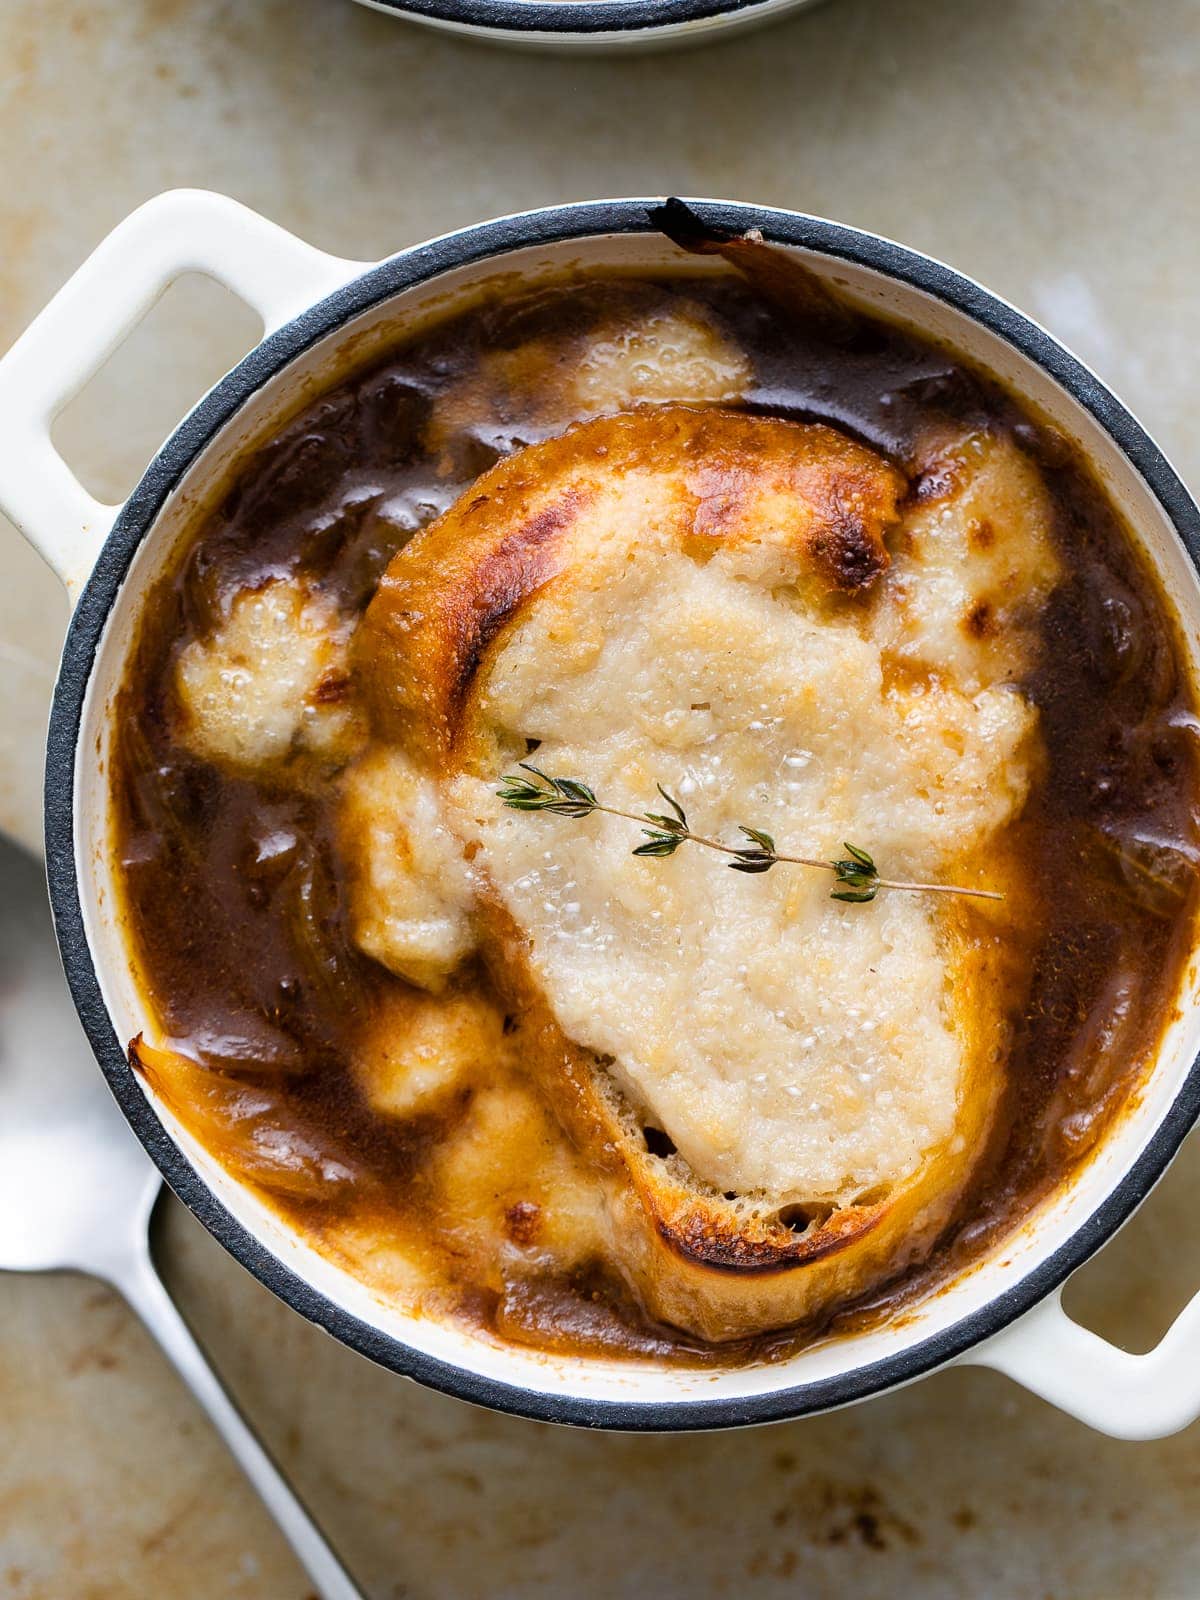 BEST VEGAN FRENCH ONION SOUP STORY - THE SIMPLE VEGANISTA